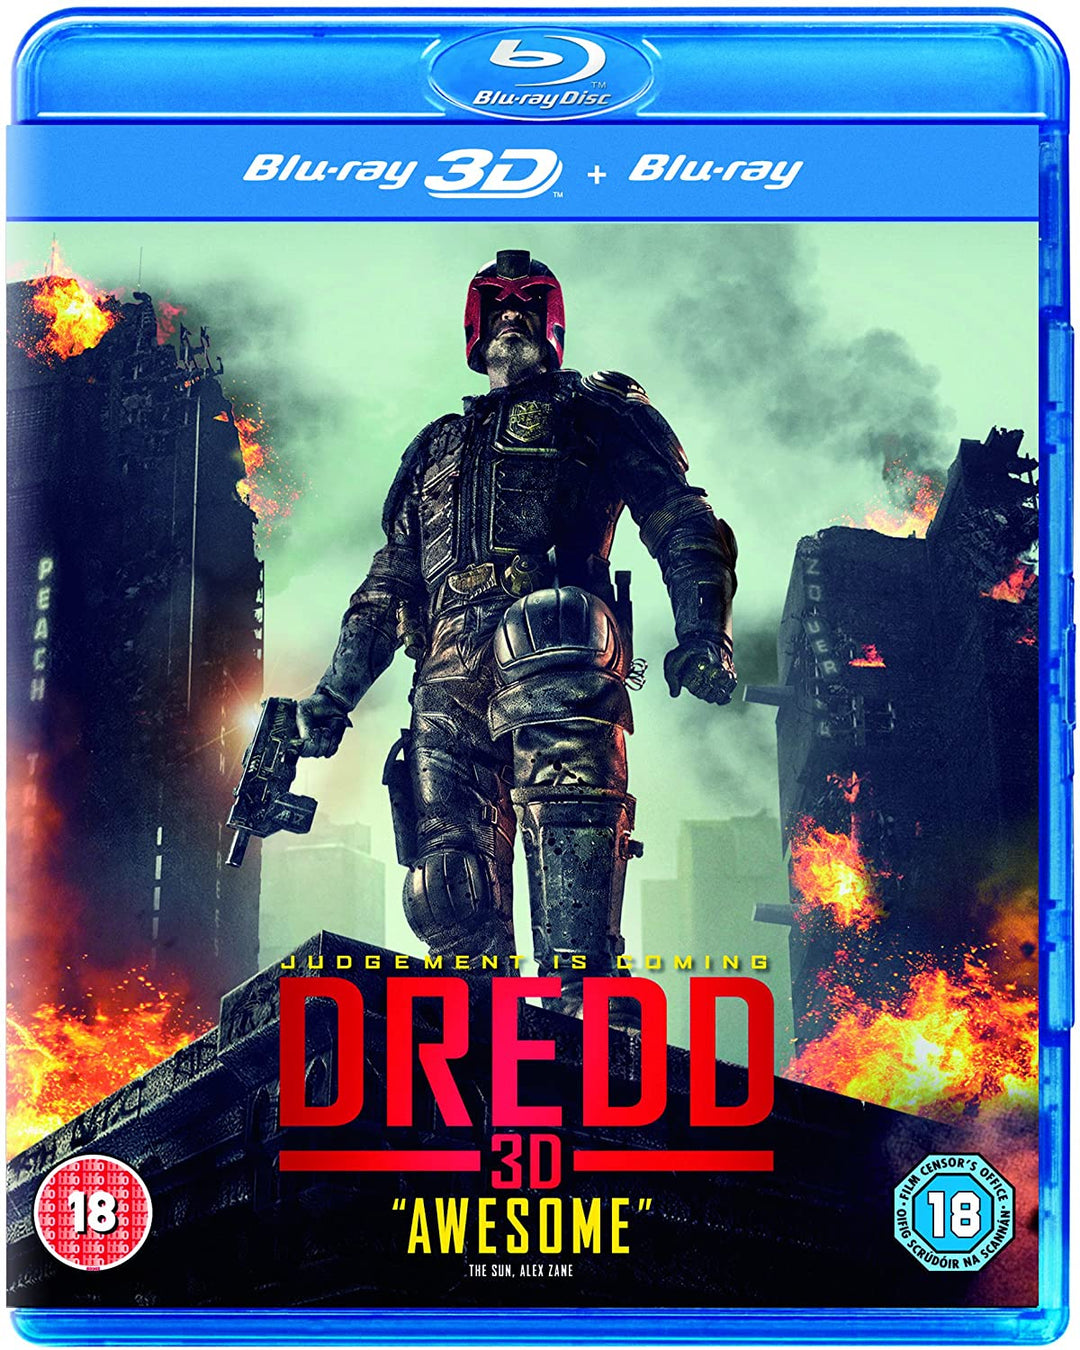 Dredd [2017] – Action/Science-Fiction [BLu-ray]